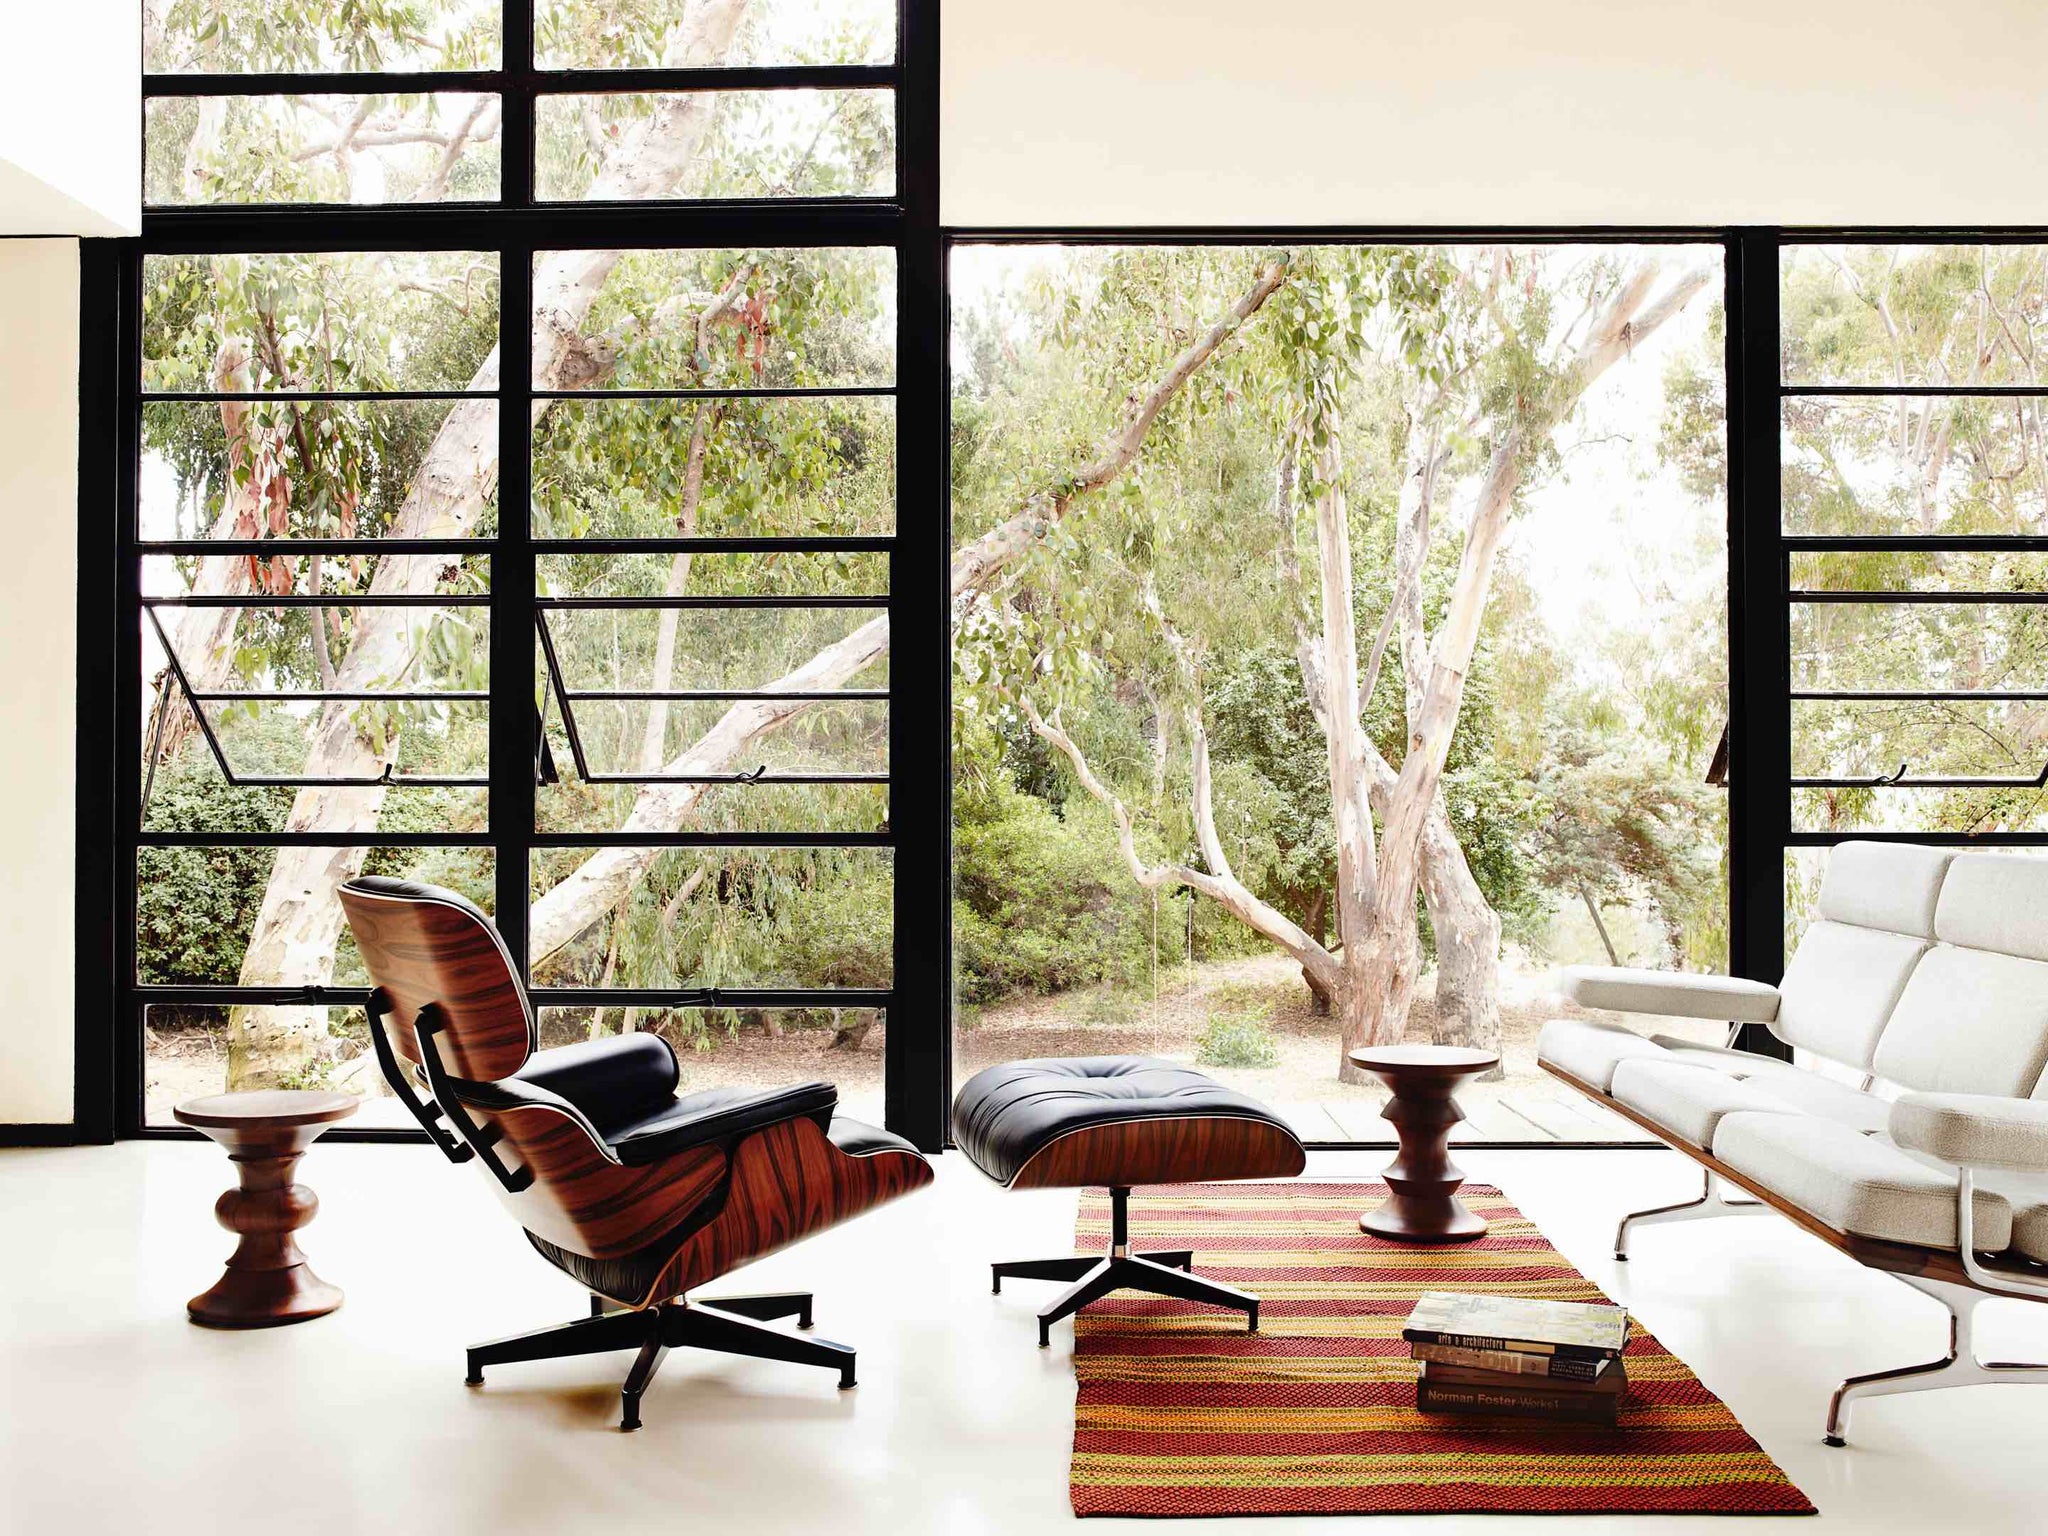 Herman Miller Eames Lounge Chair and Couch in a Living Room Vignette  